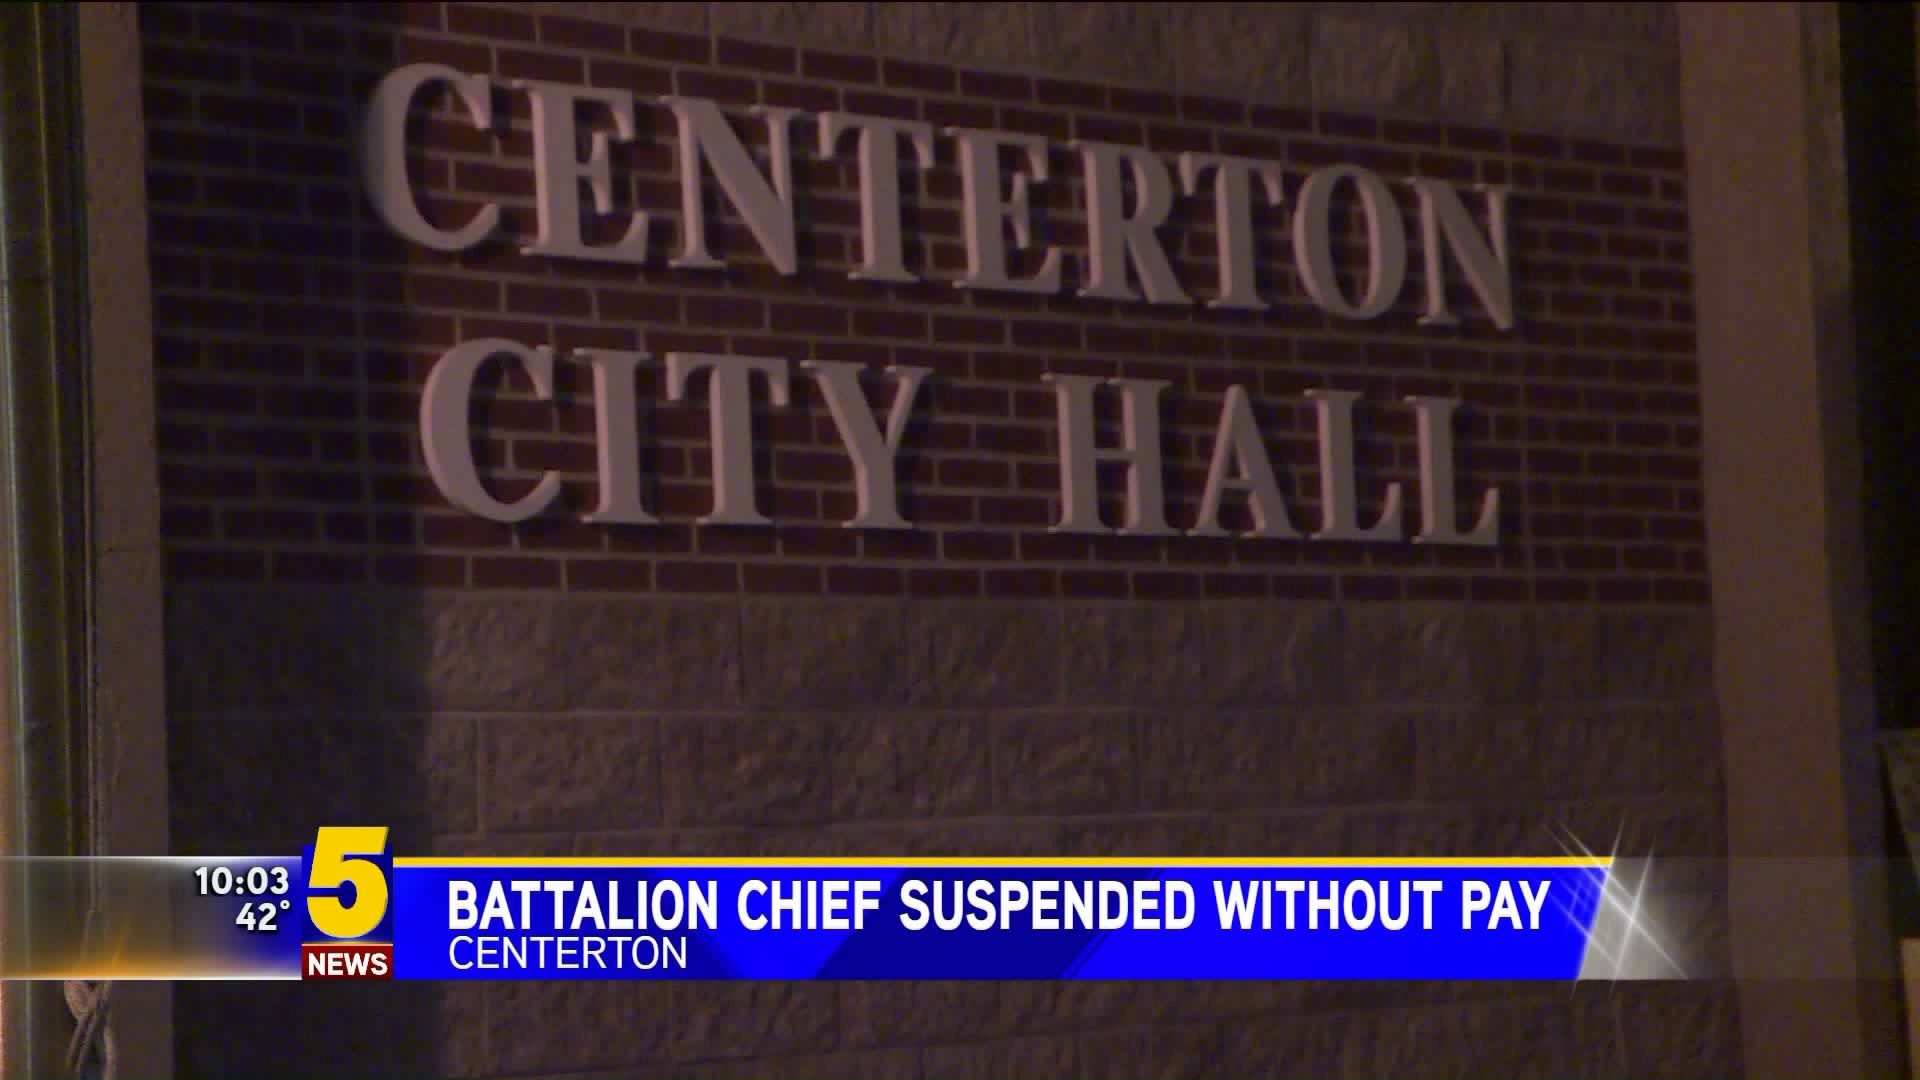 Battalion chief suspende without pay